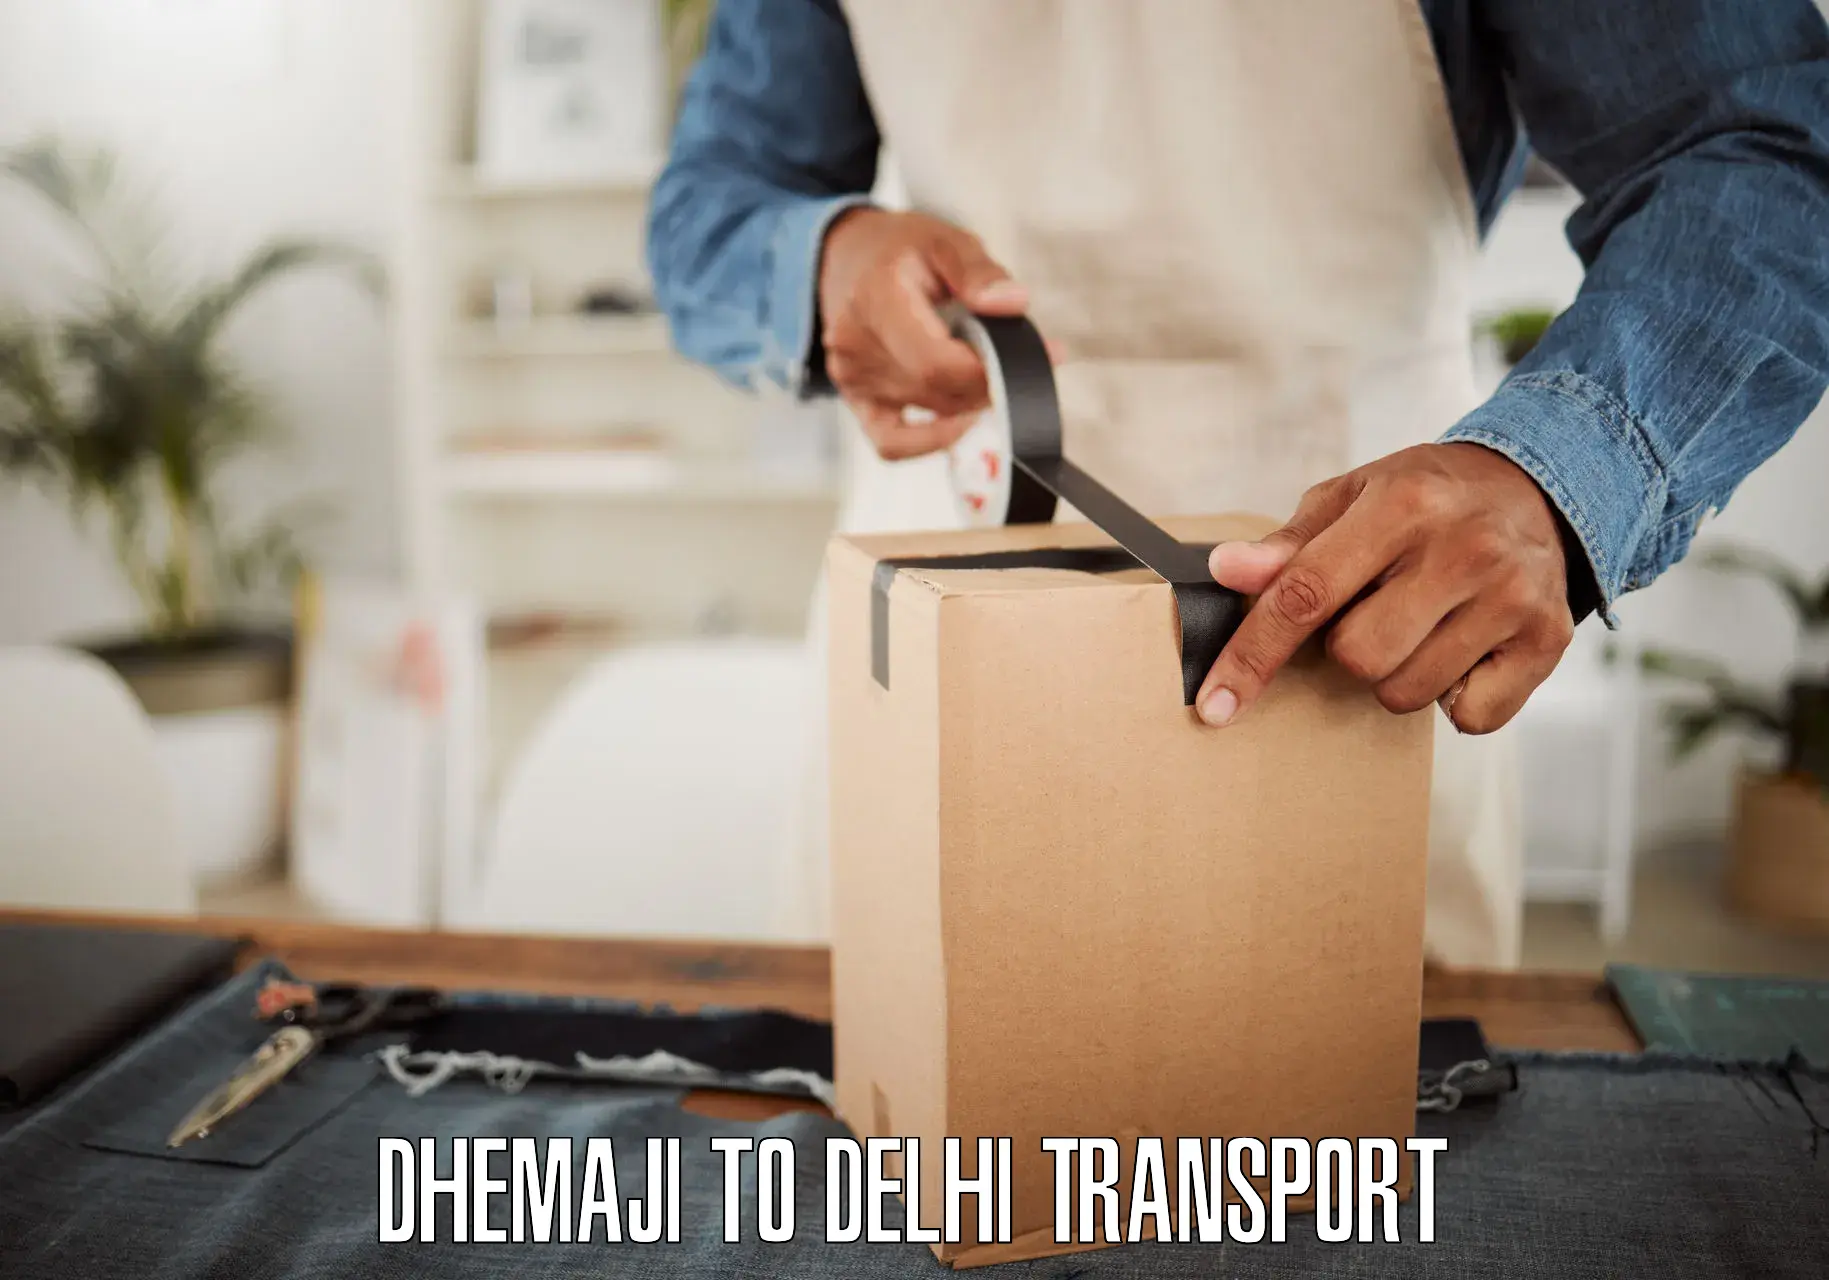 Parcel transport services Dhemaji to NCR